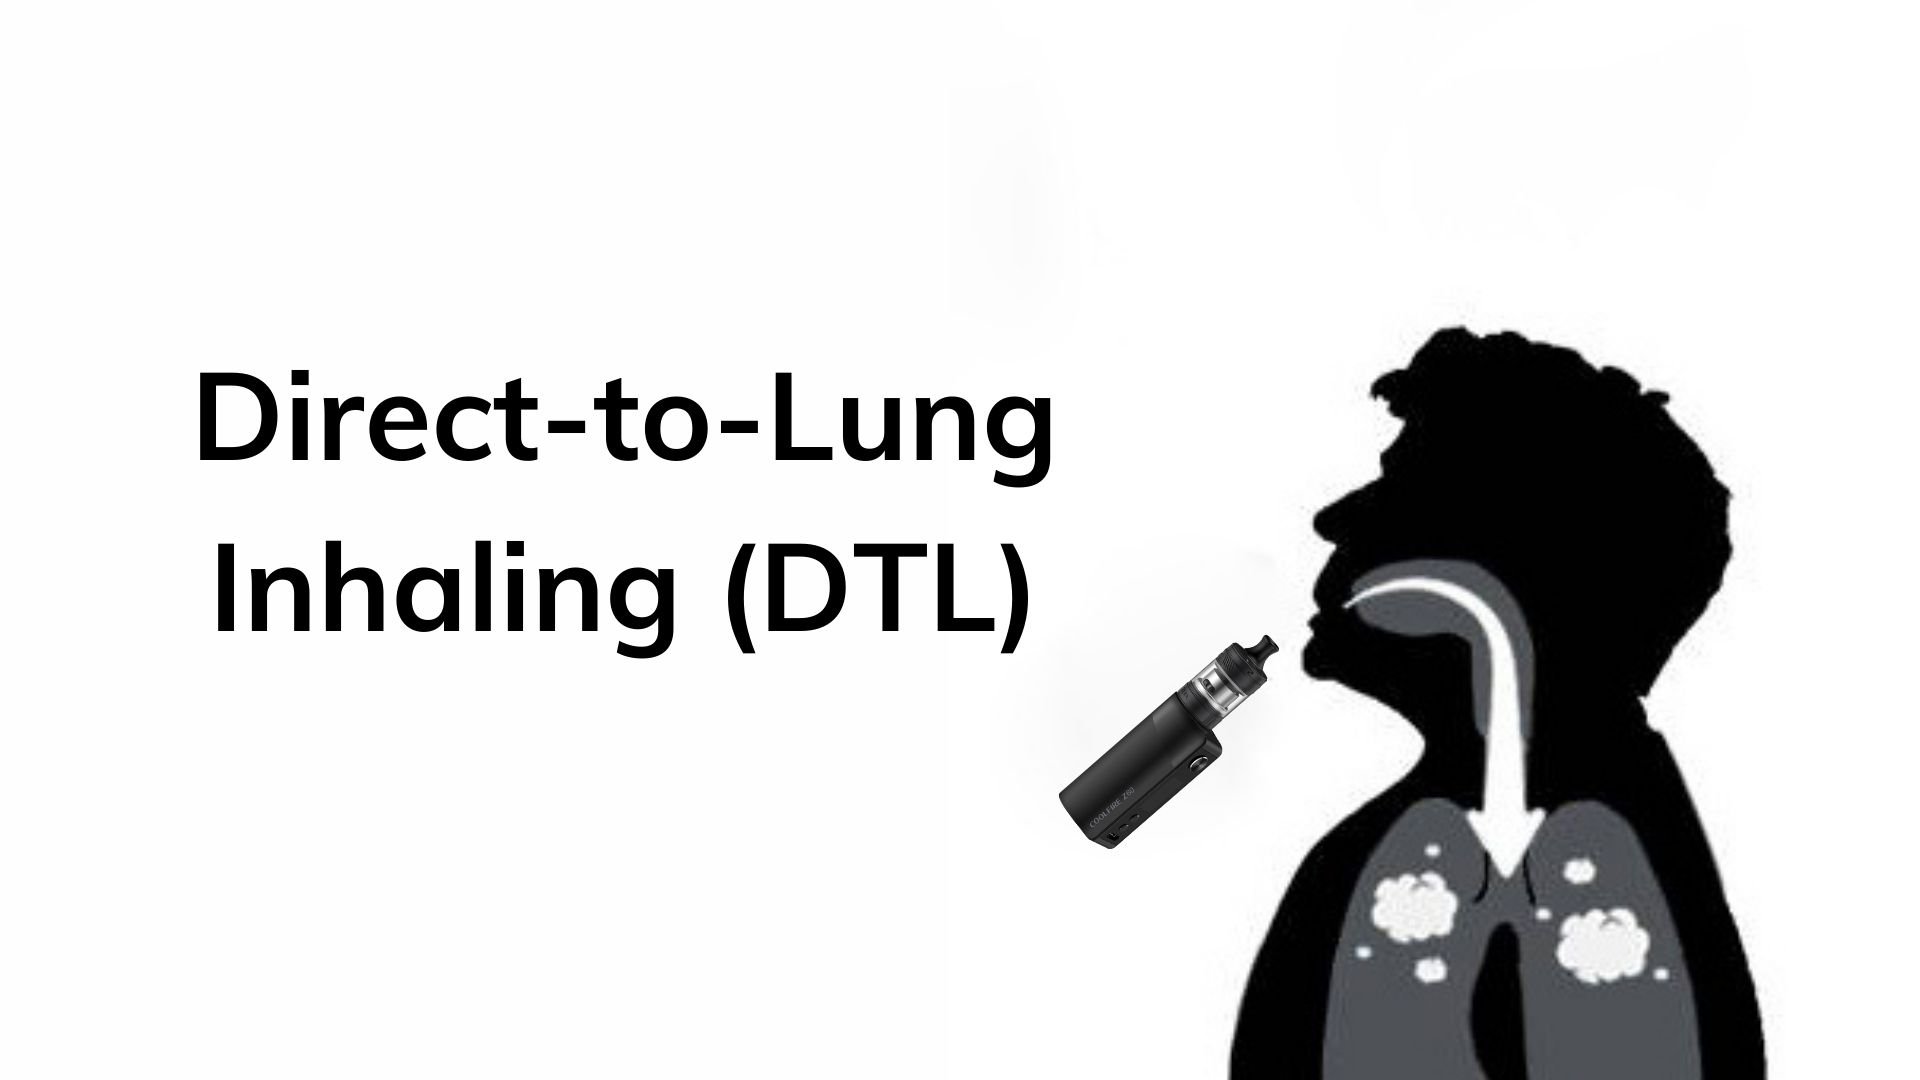 Direct-to-Lung Inhaling (DTL)